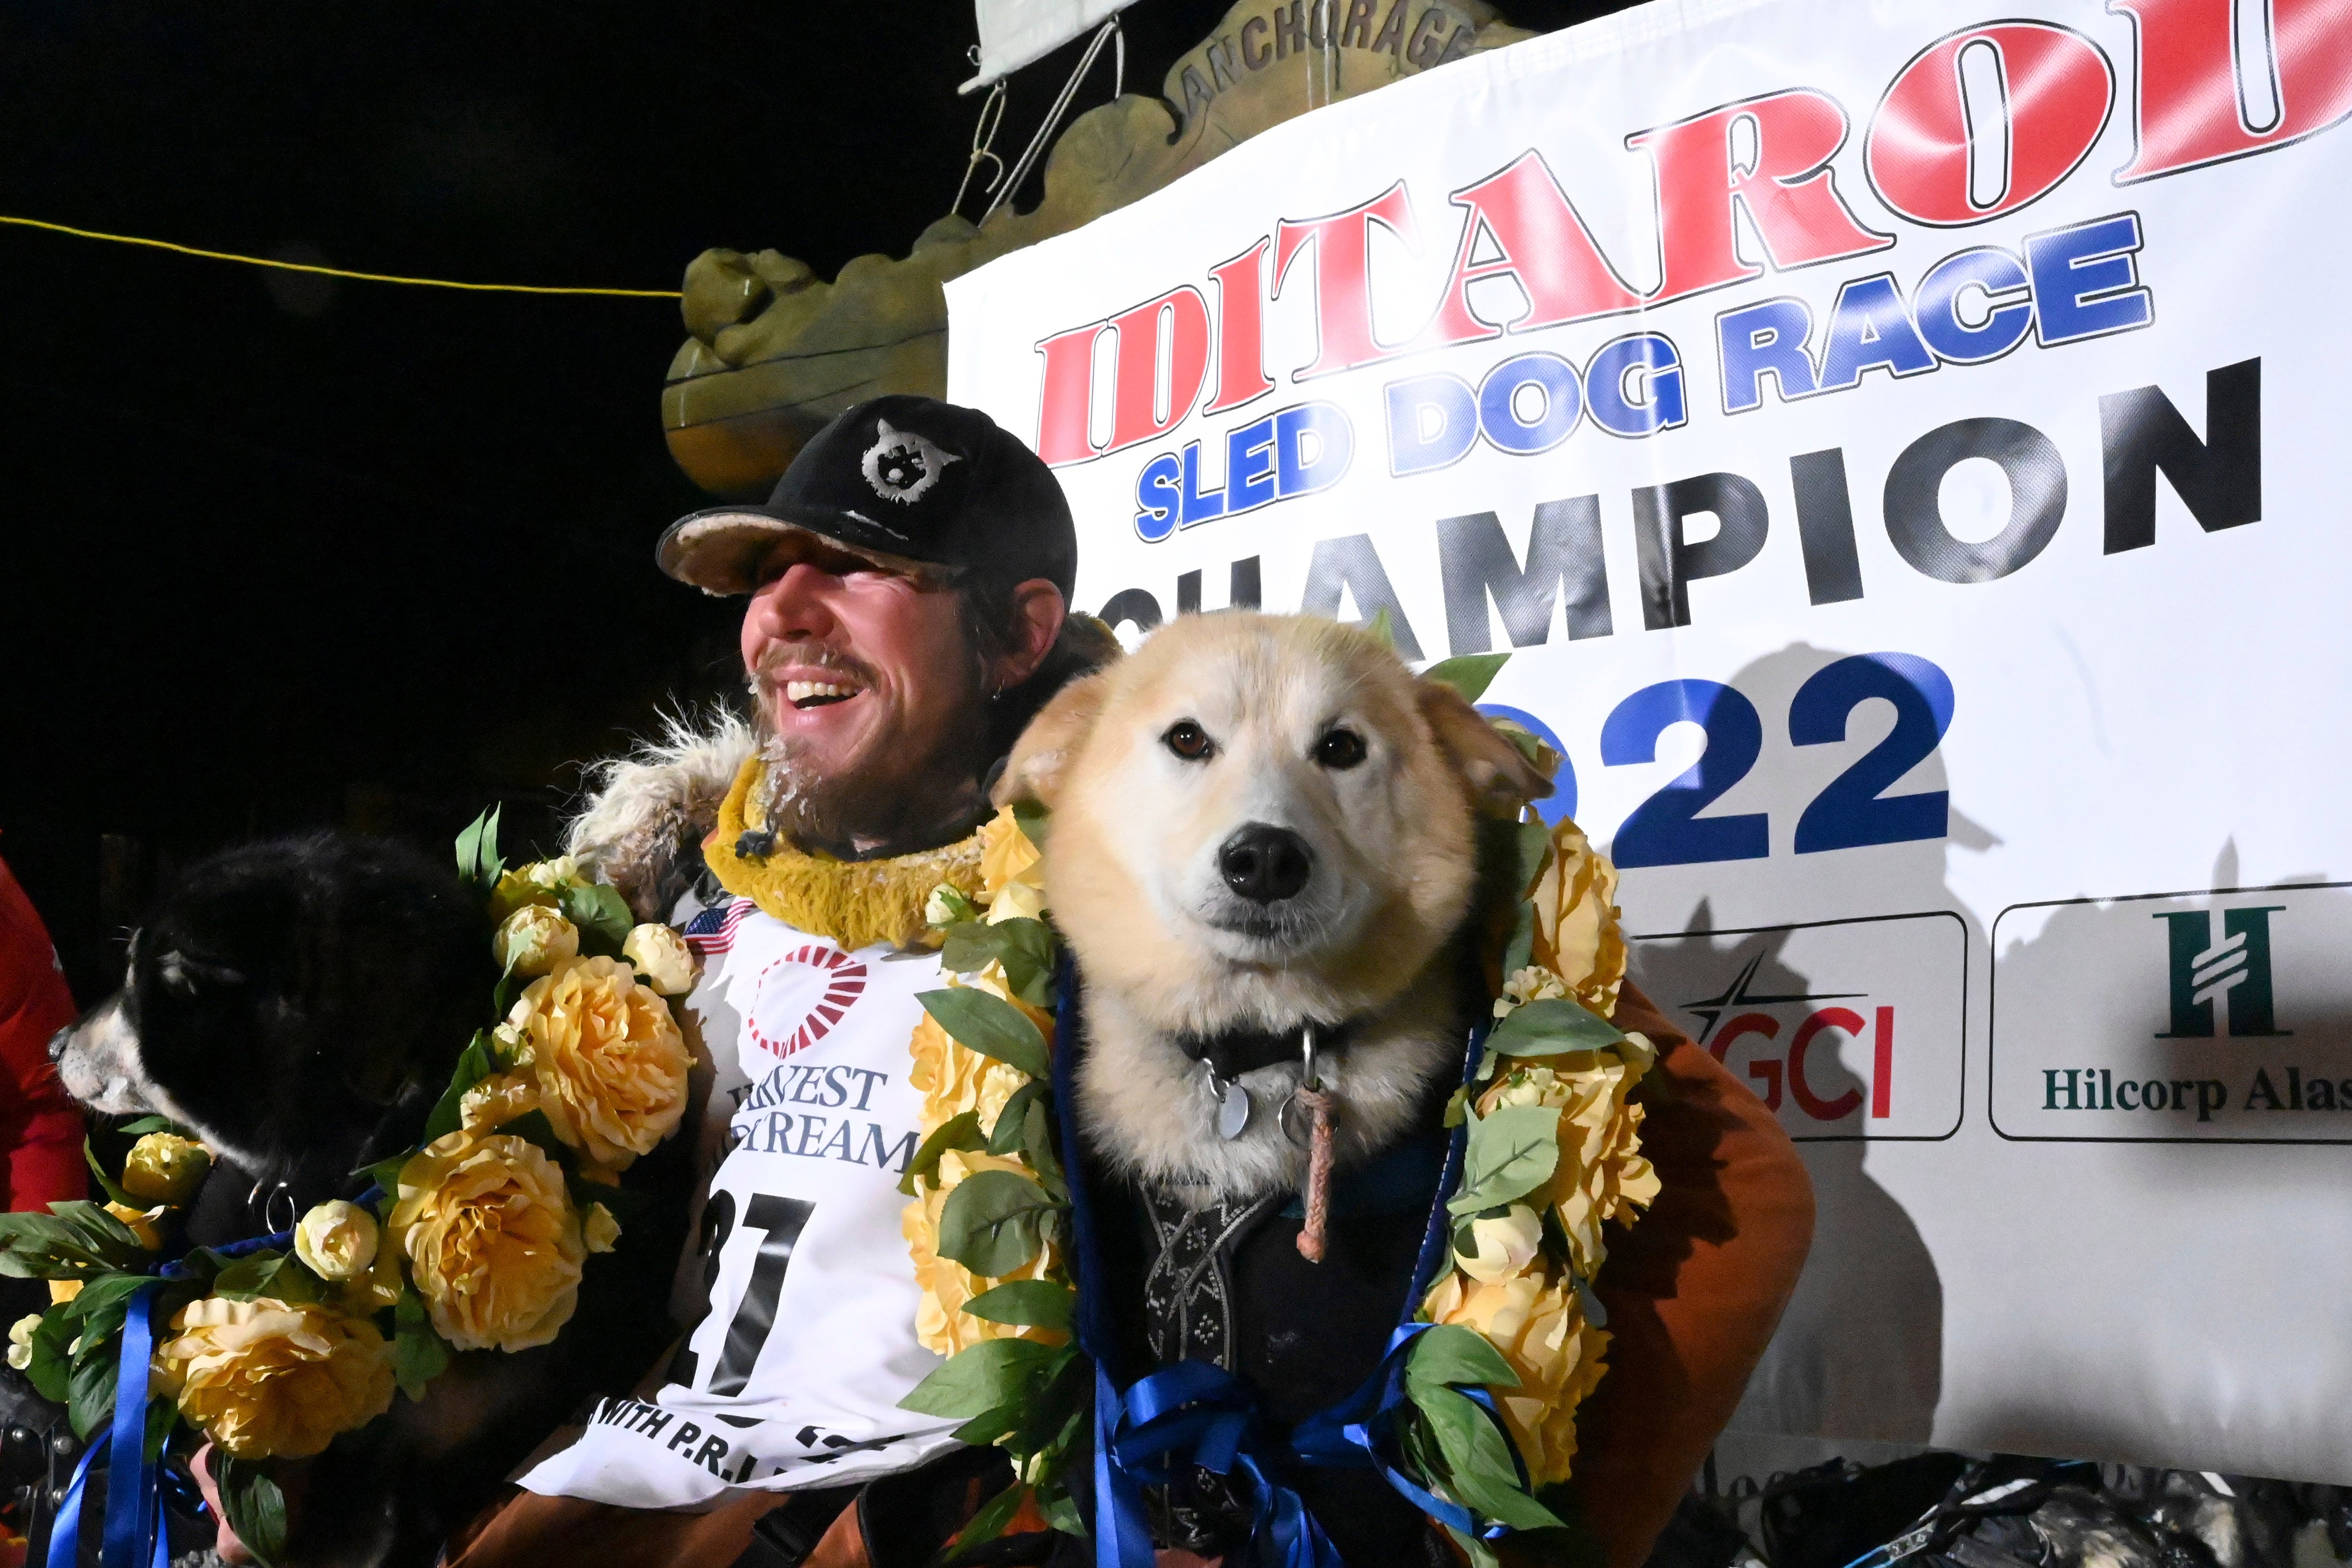 Iditarod winner Brent Sass poses for photos with lead dogs Morello, left, and Slater